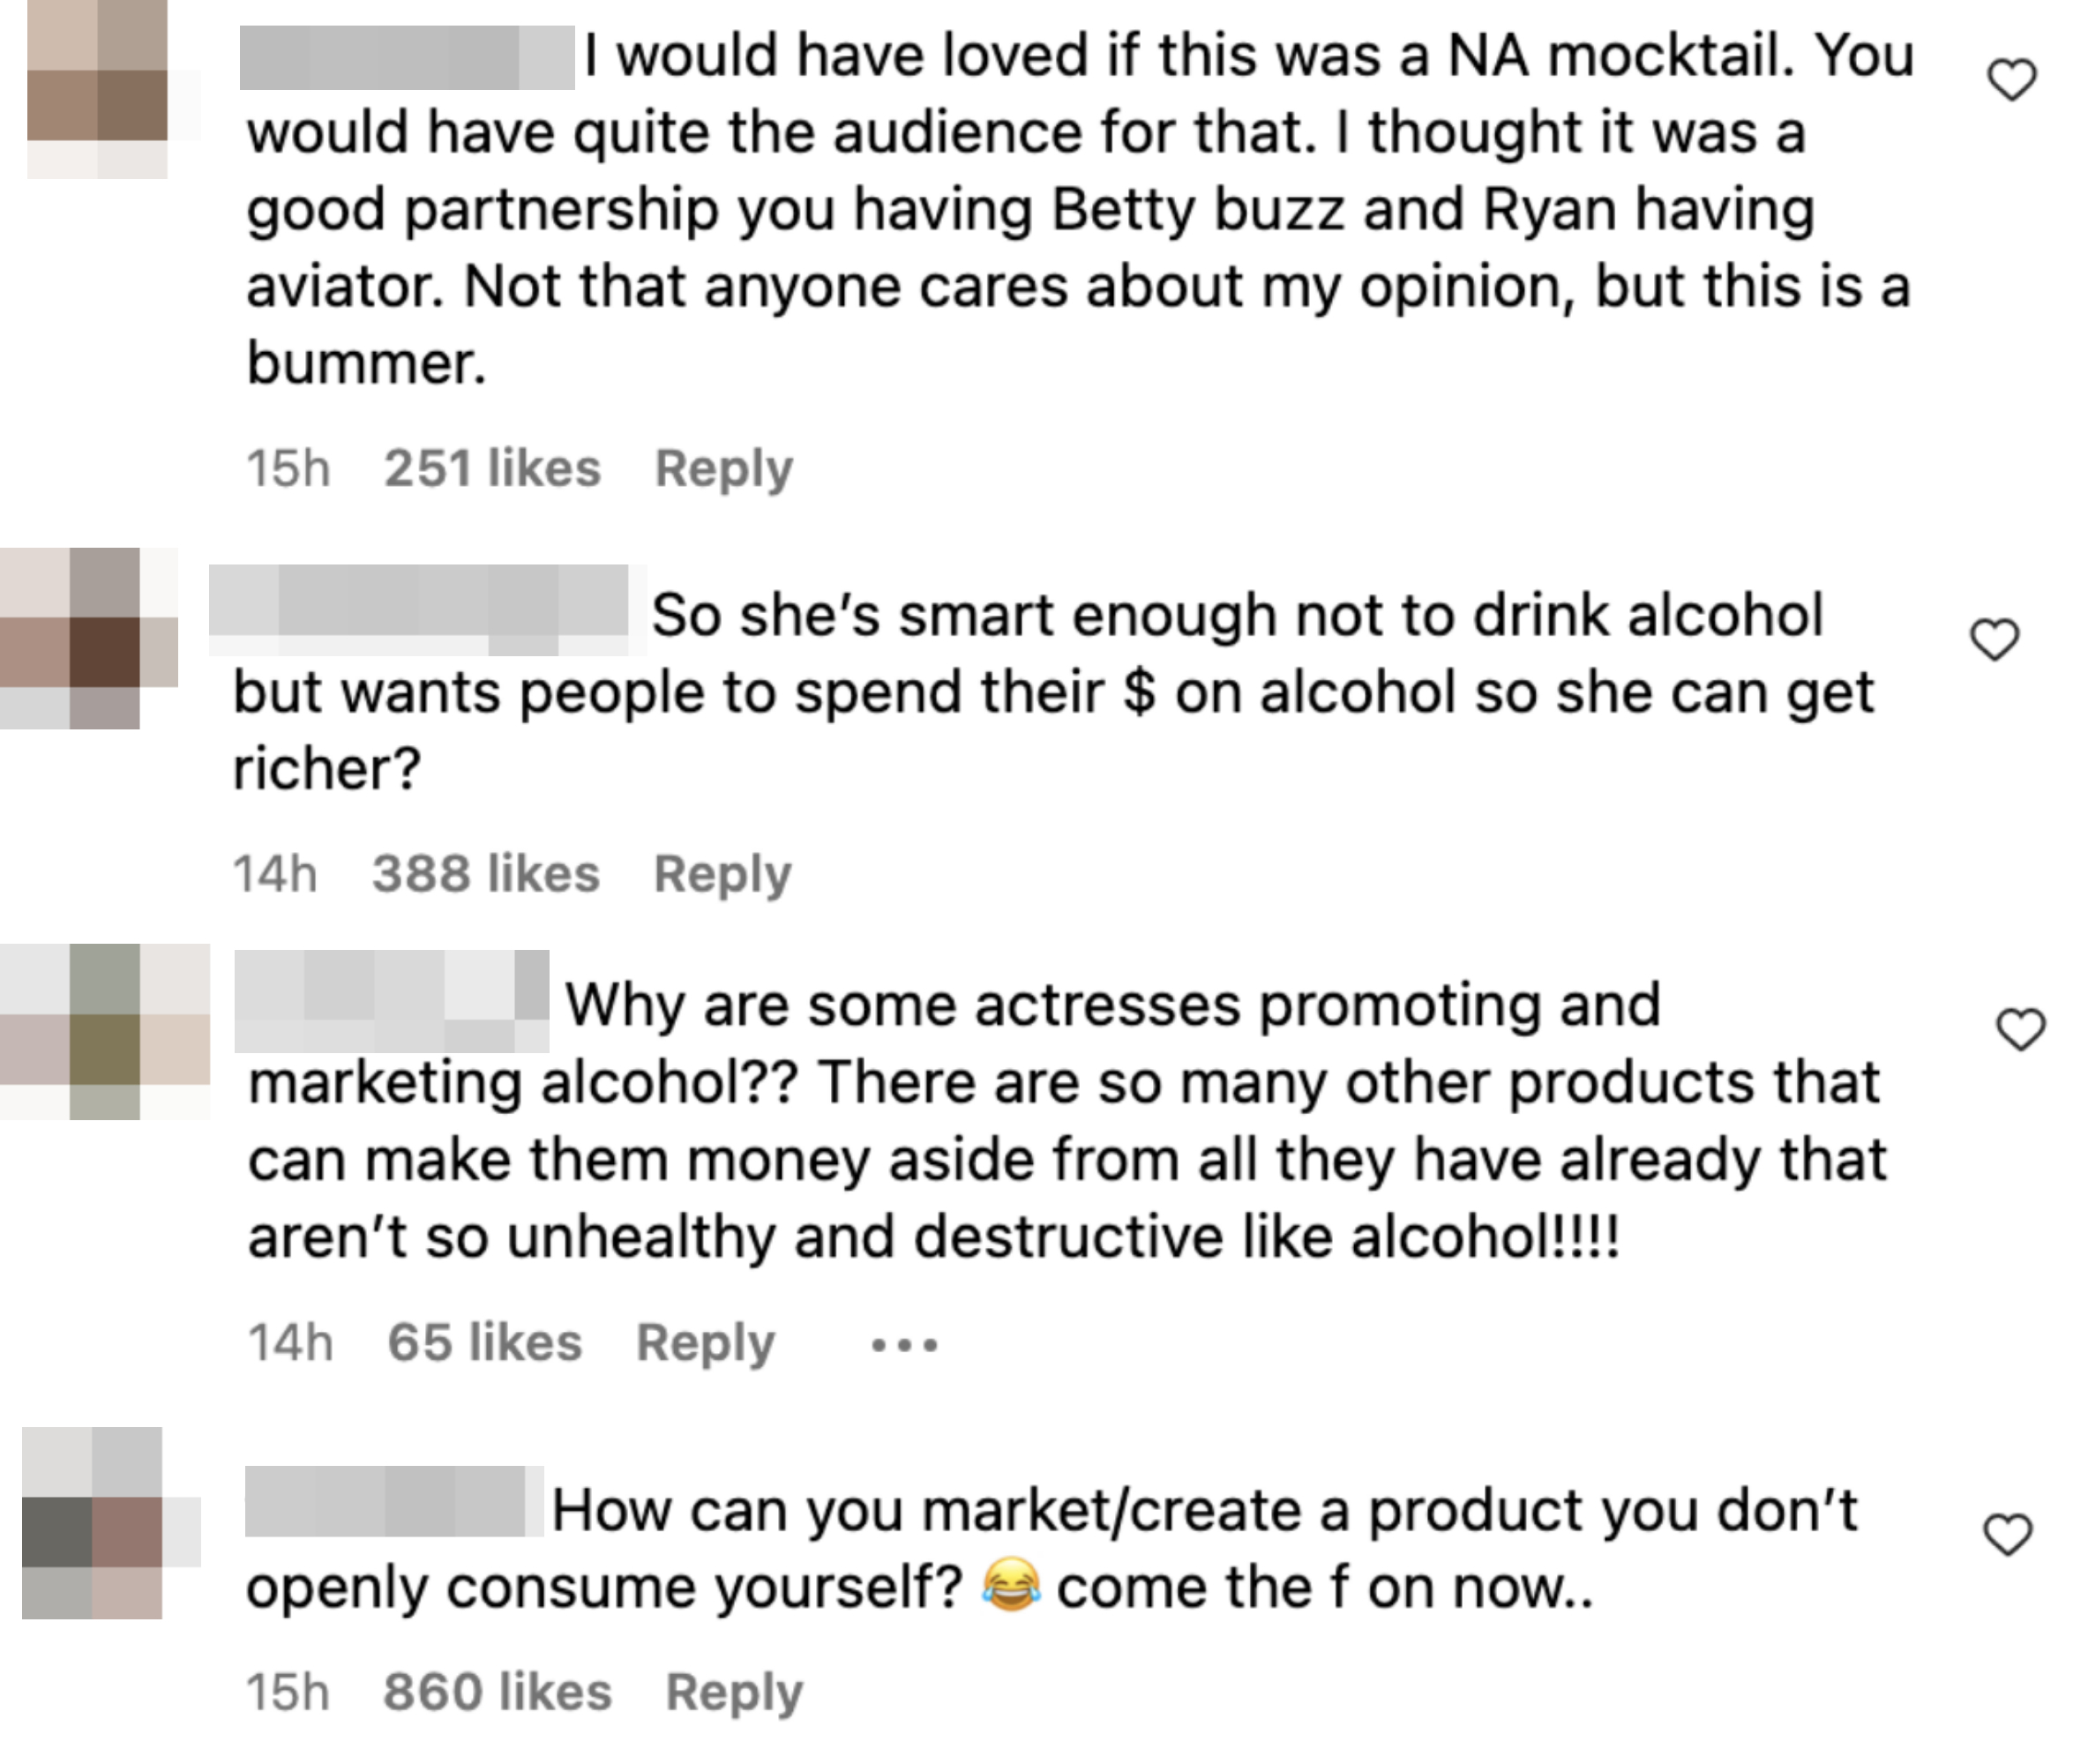 One comment read, &quot;How can you market/create a product you don&#x27;t openly consume yourself?&quot;